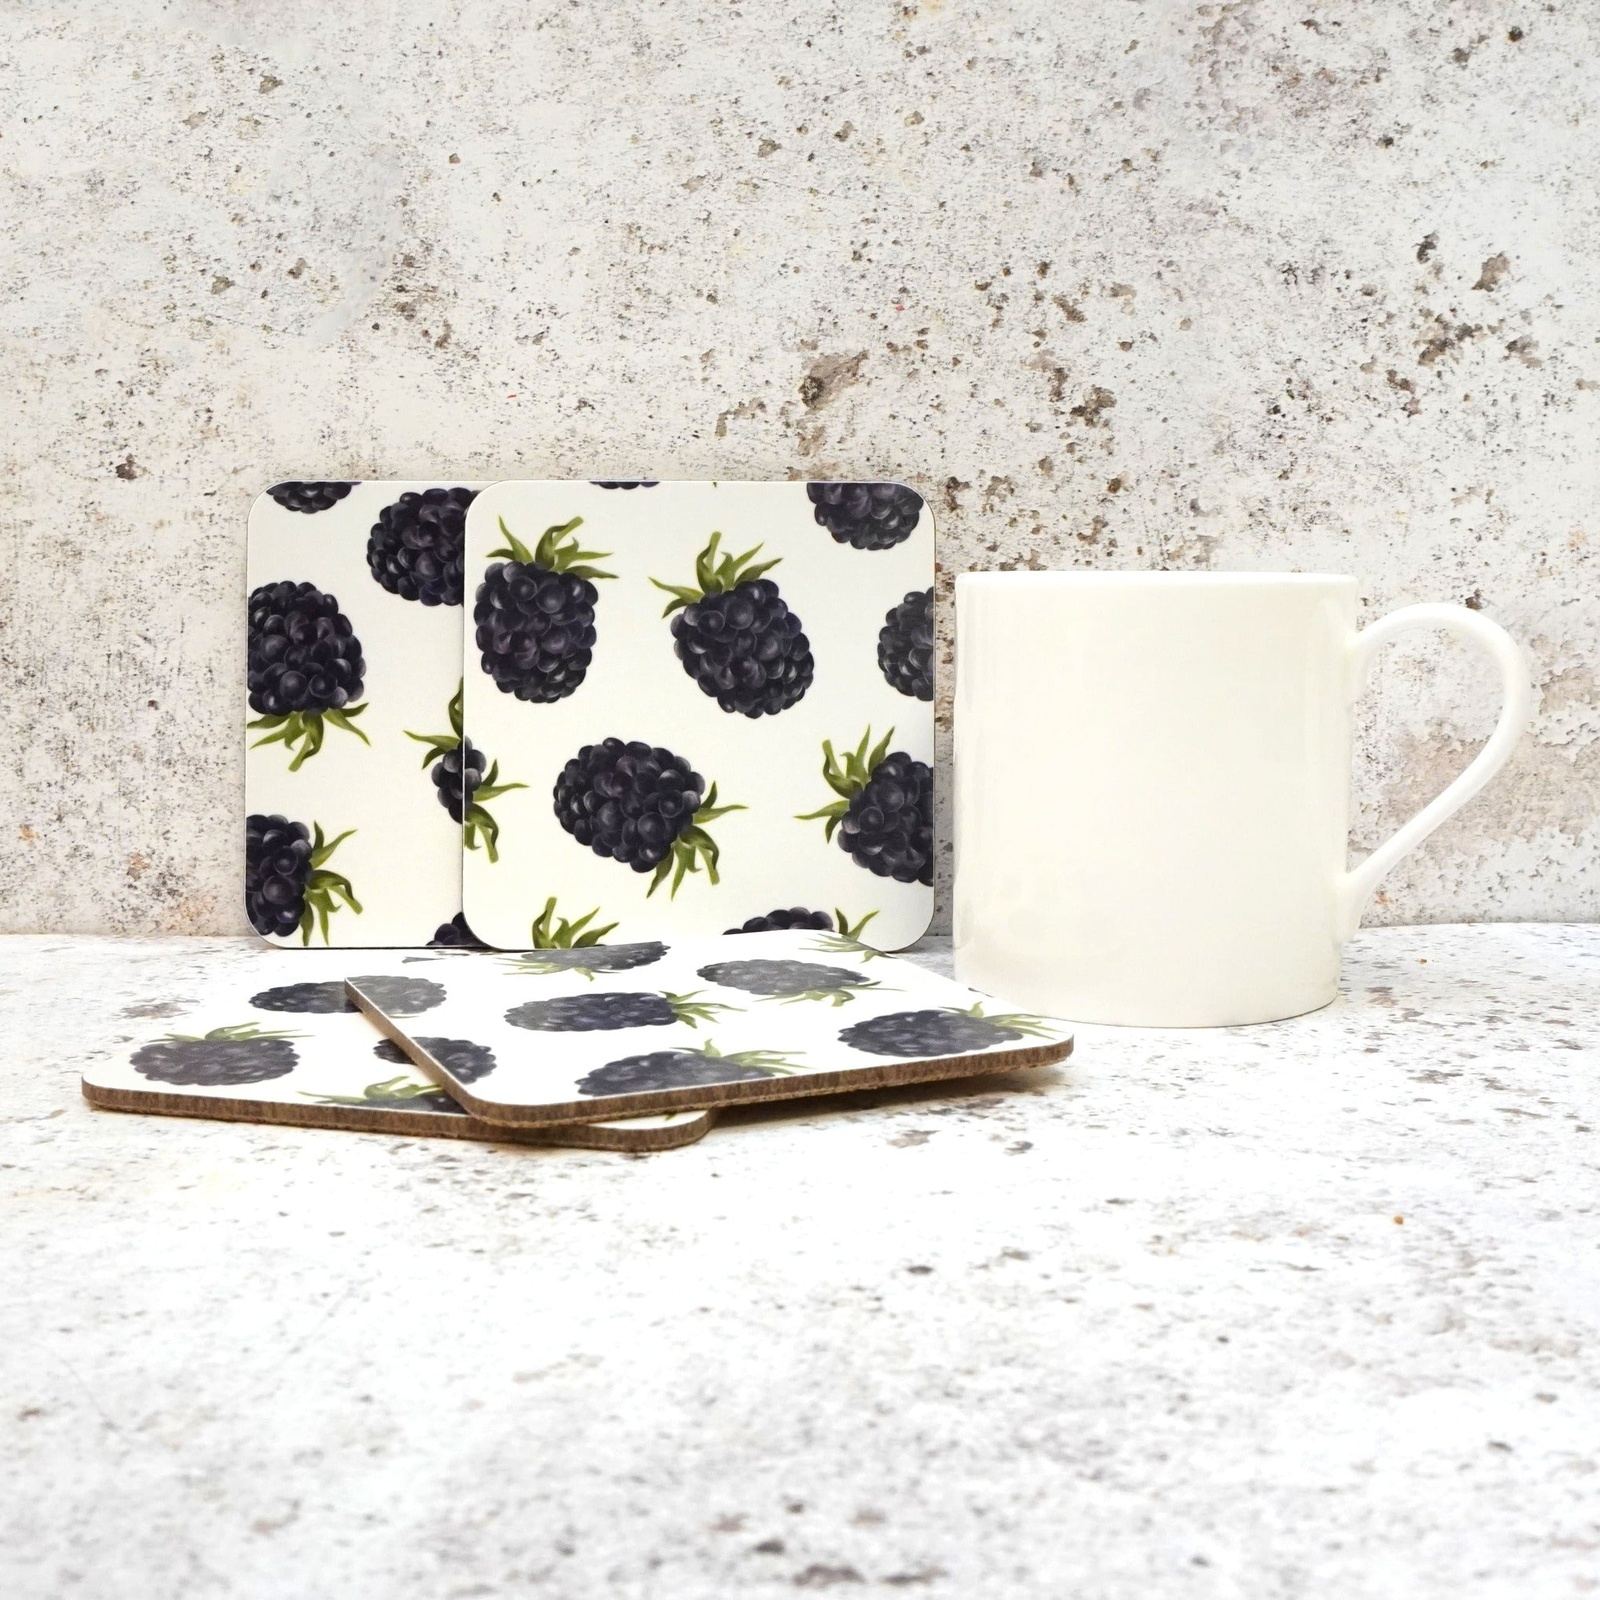 Blackberry coaster sets available with matching placemat set